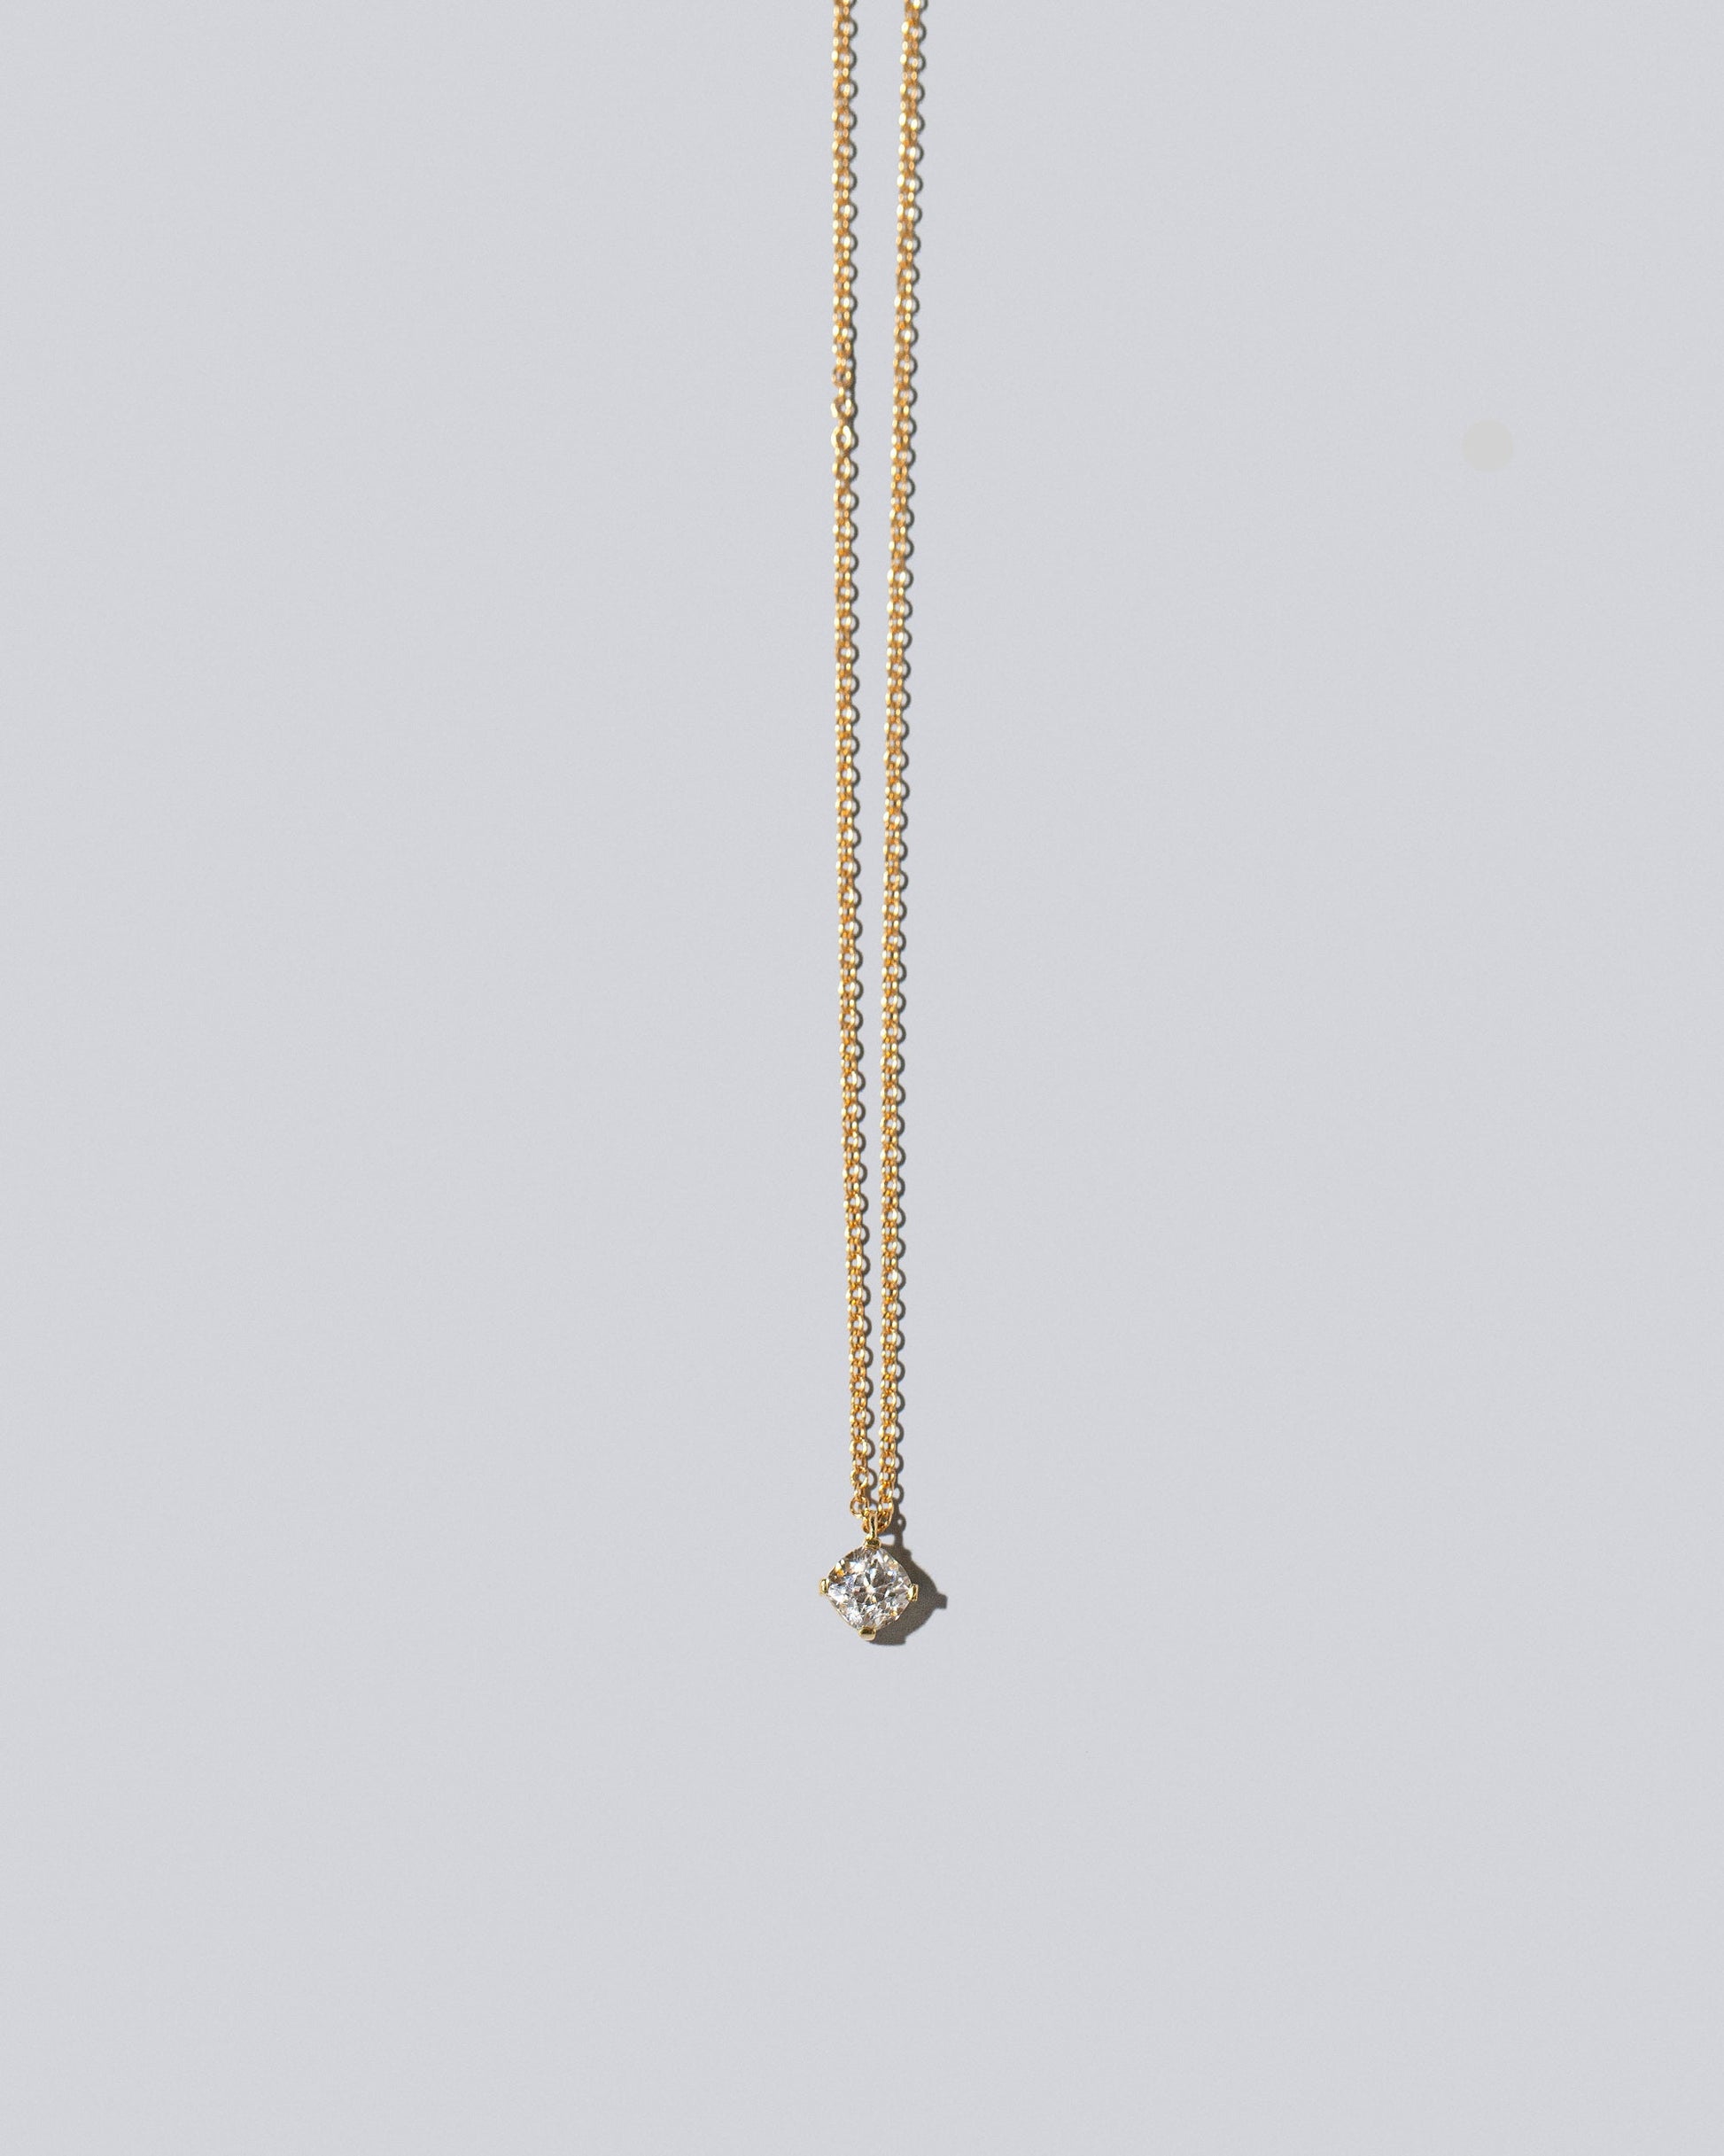 Product photo of Octave Necklace on light background